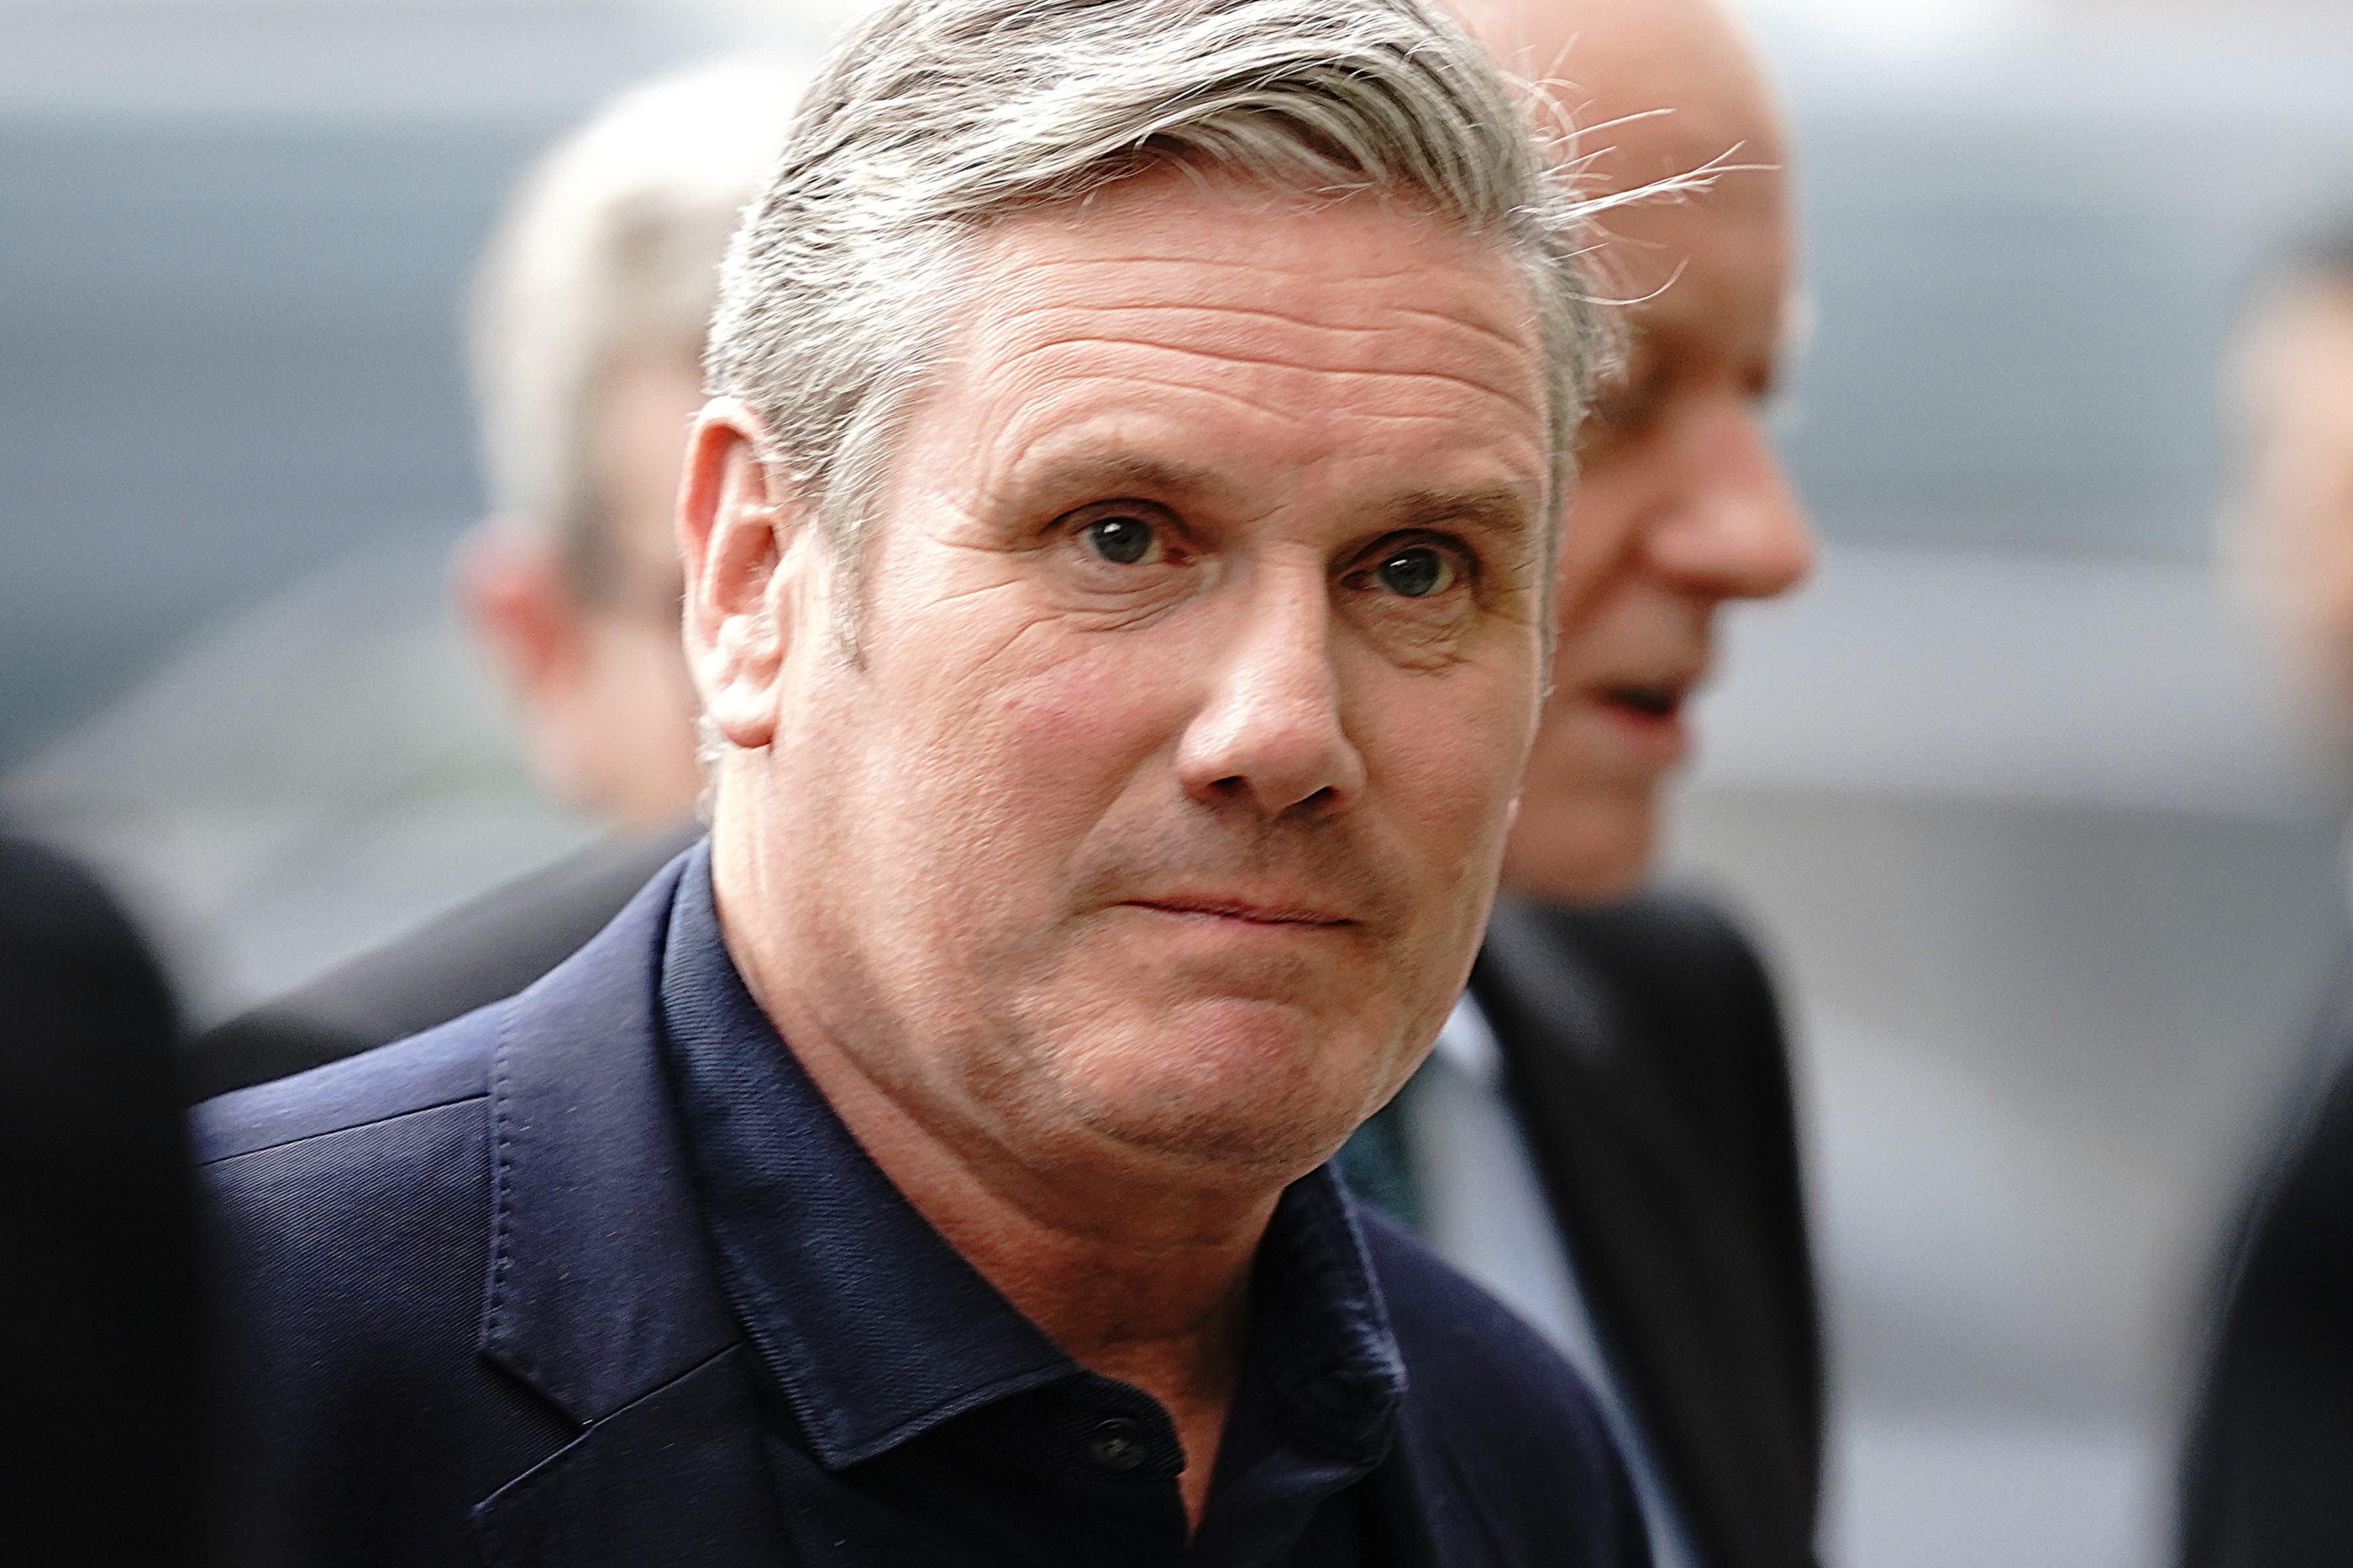 Sir Keir Starmer on Sunday confirmed he would retain the Tories’ two-child benefit limit